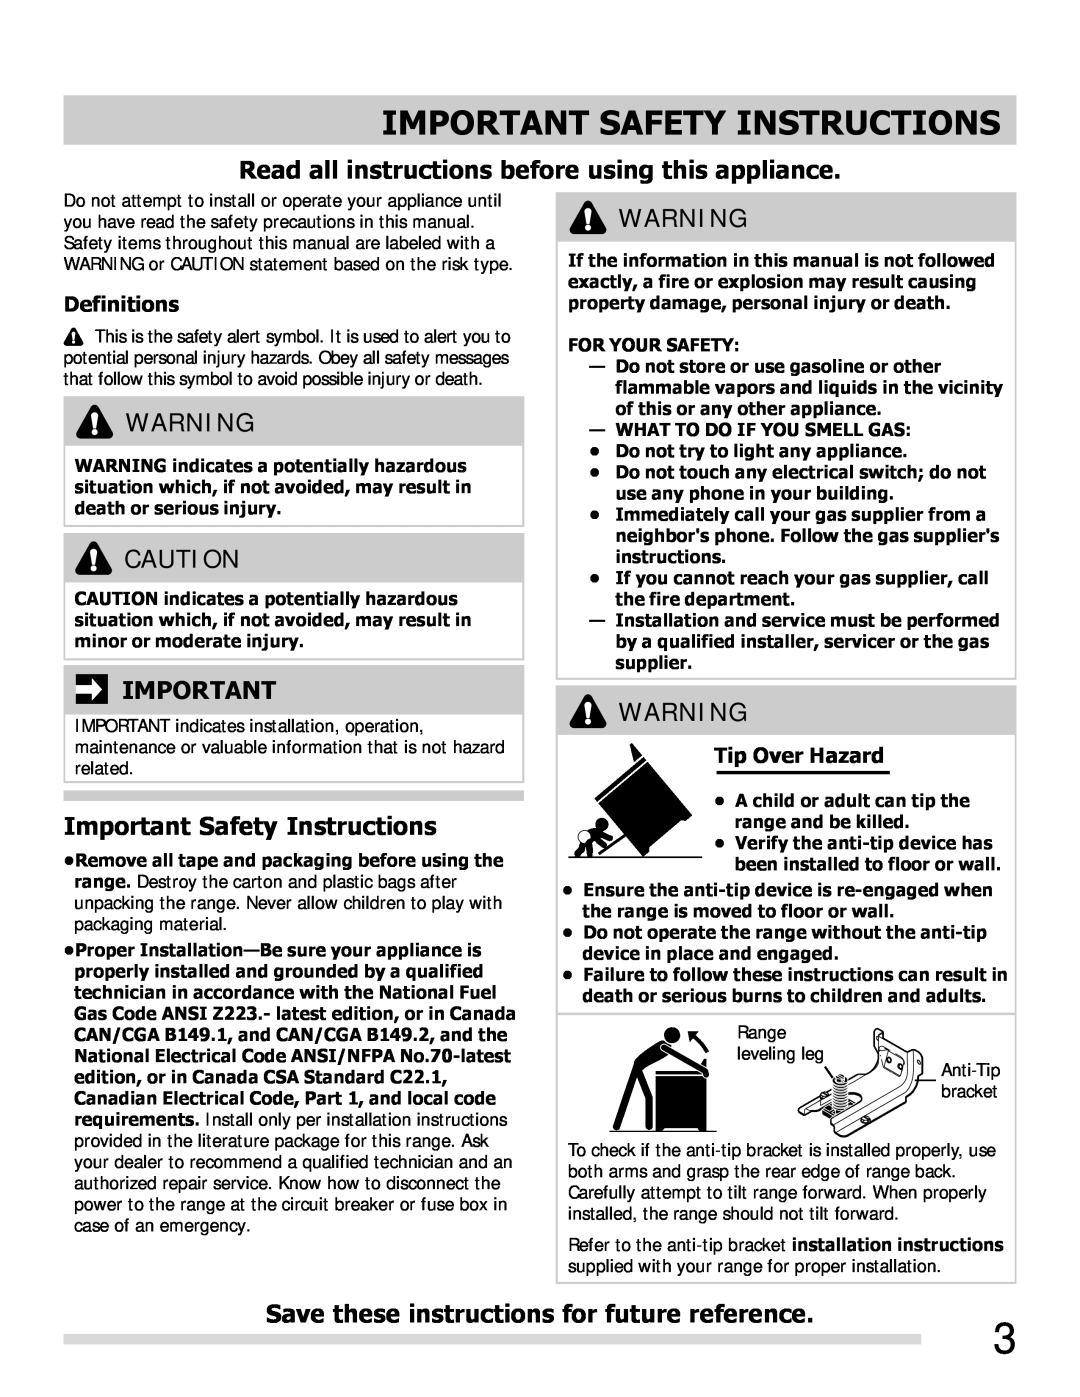 Frigidaire FGGF3054MF Important Safety Instructions, Read all instructions before using this appliance, Definitions 